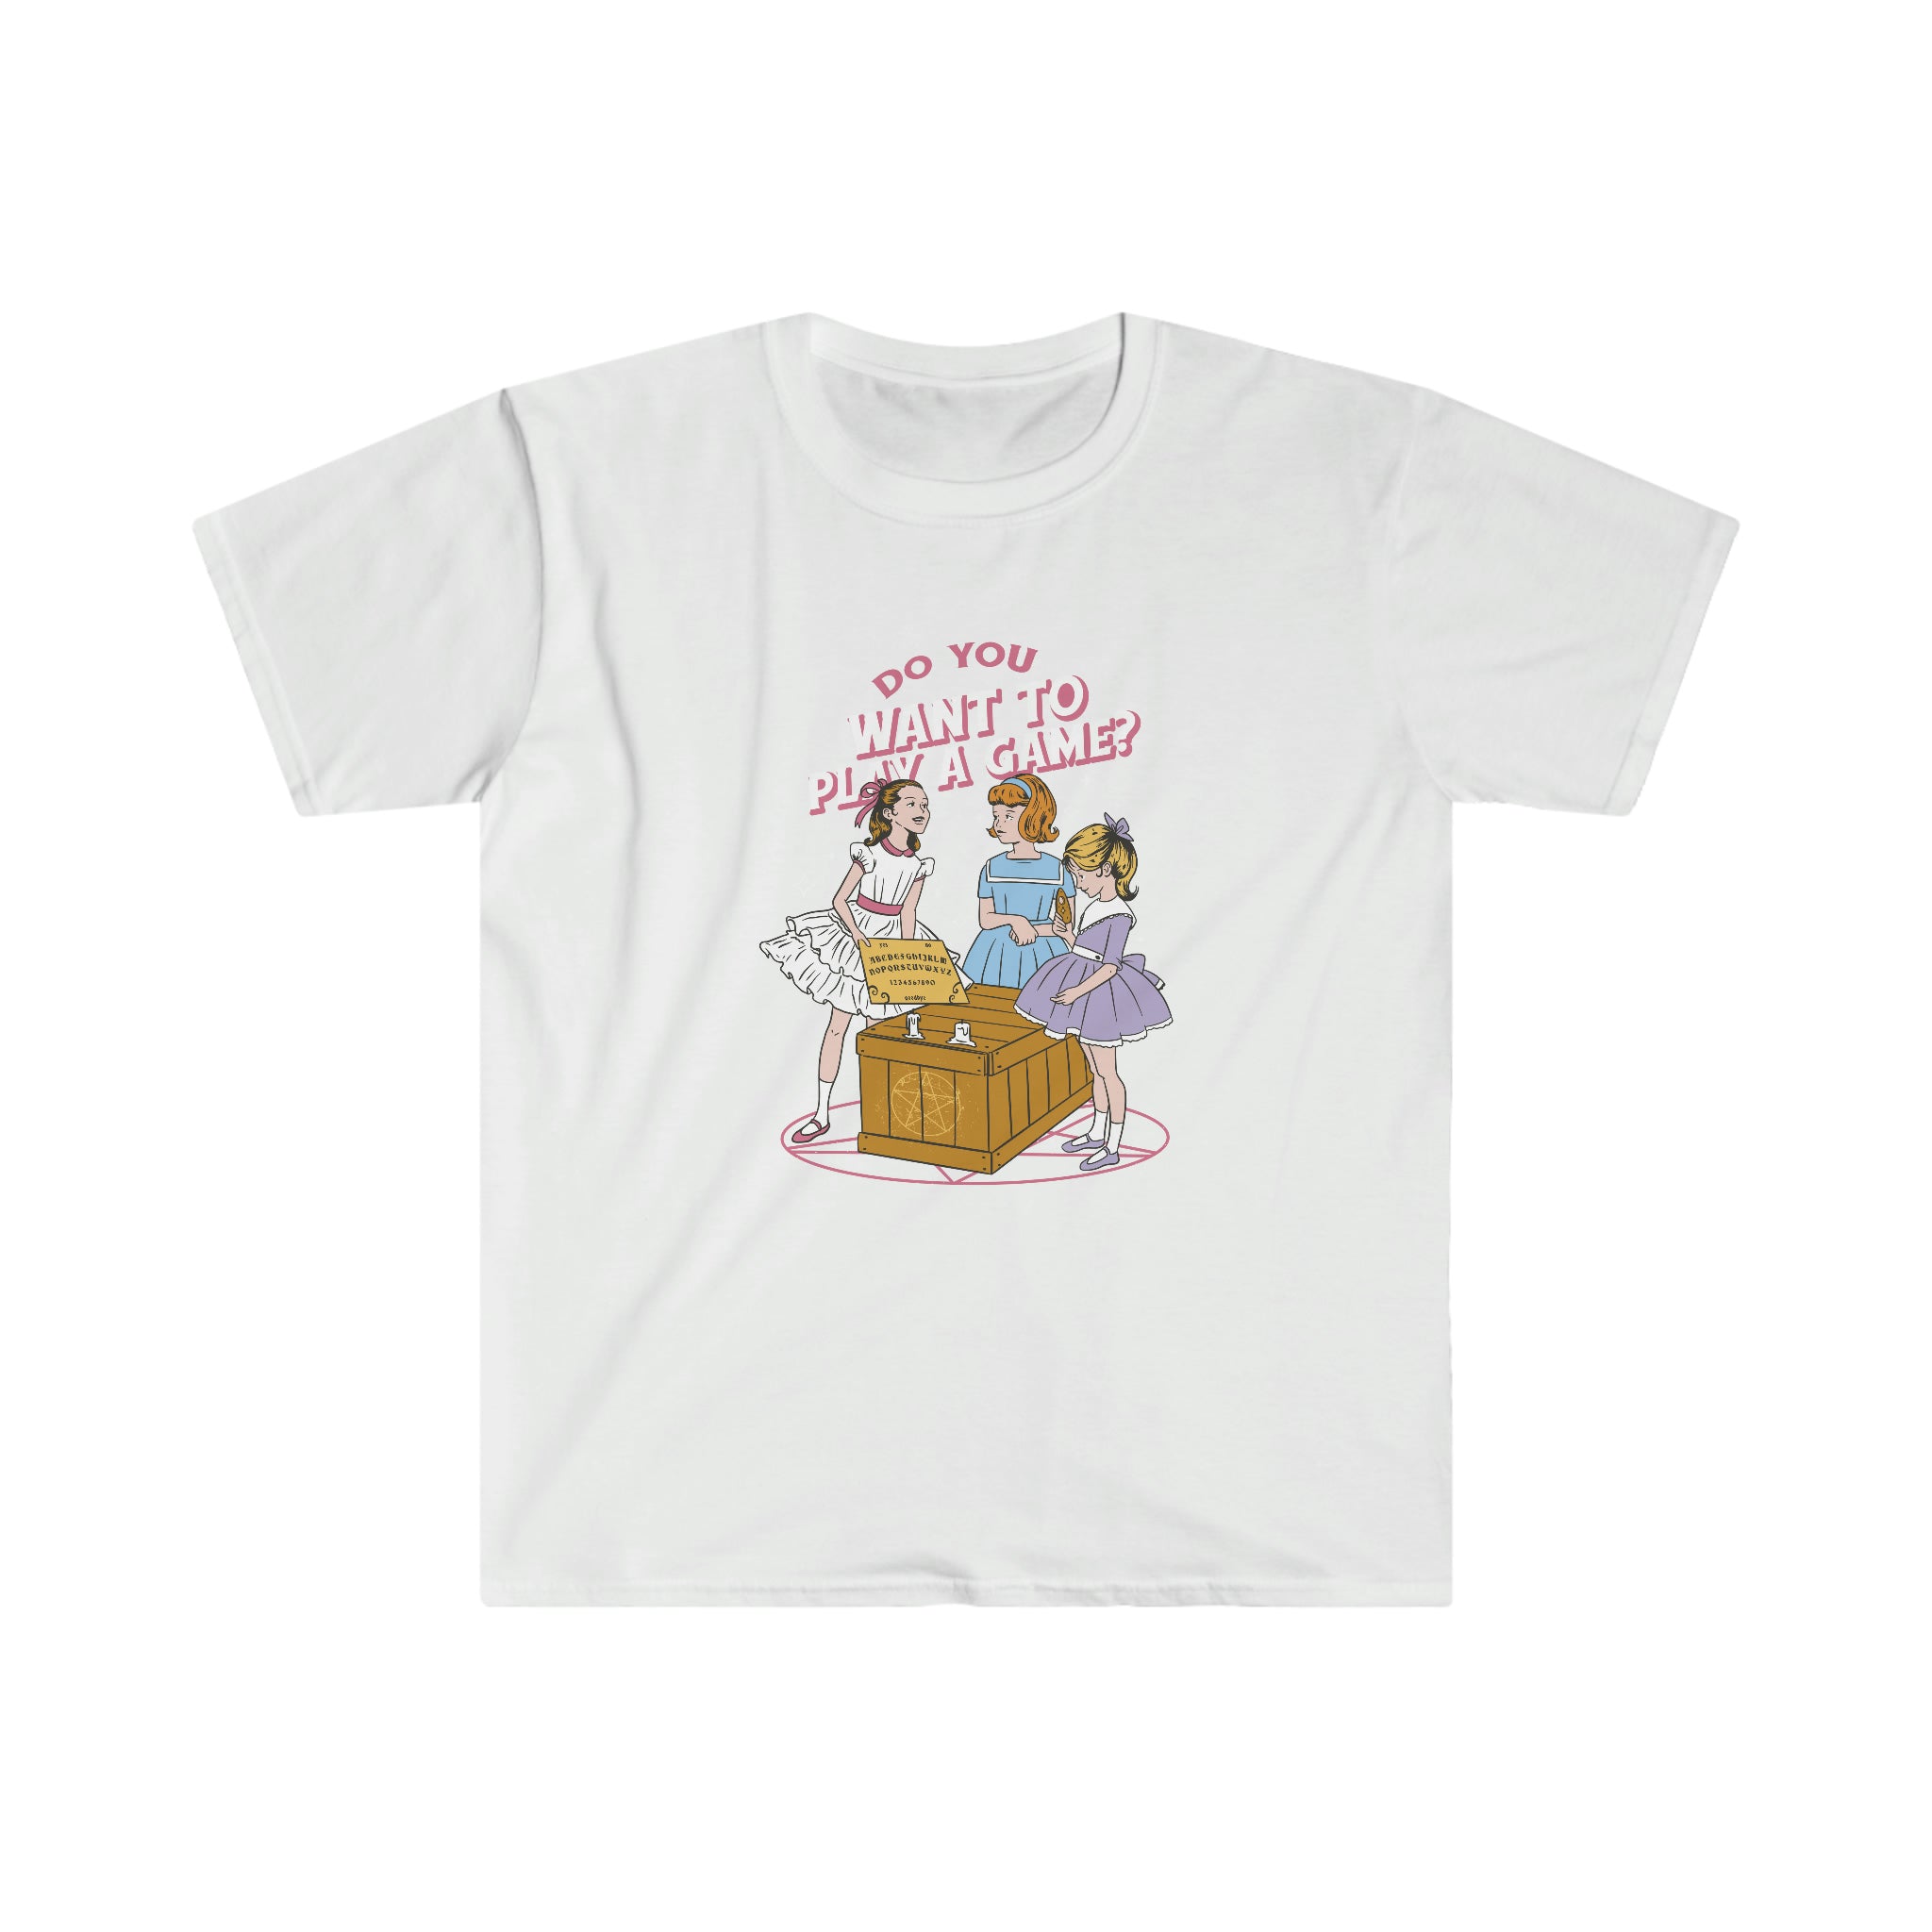 A Do You Want to Play a Game? T-Shirt featuring two girls playing with a basket.